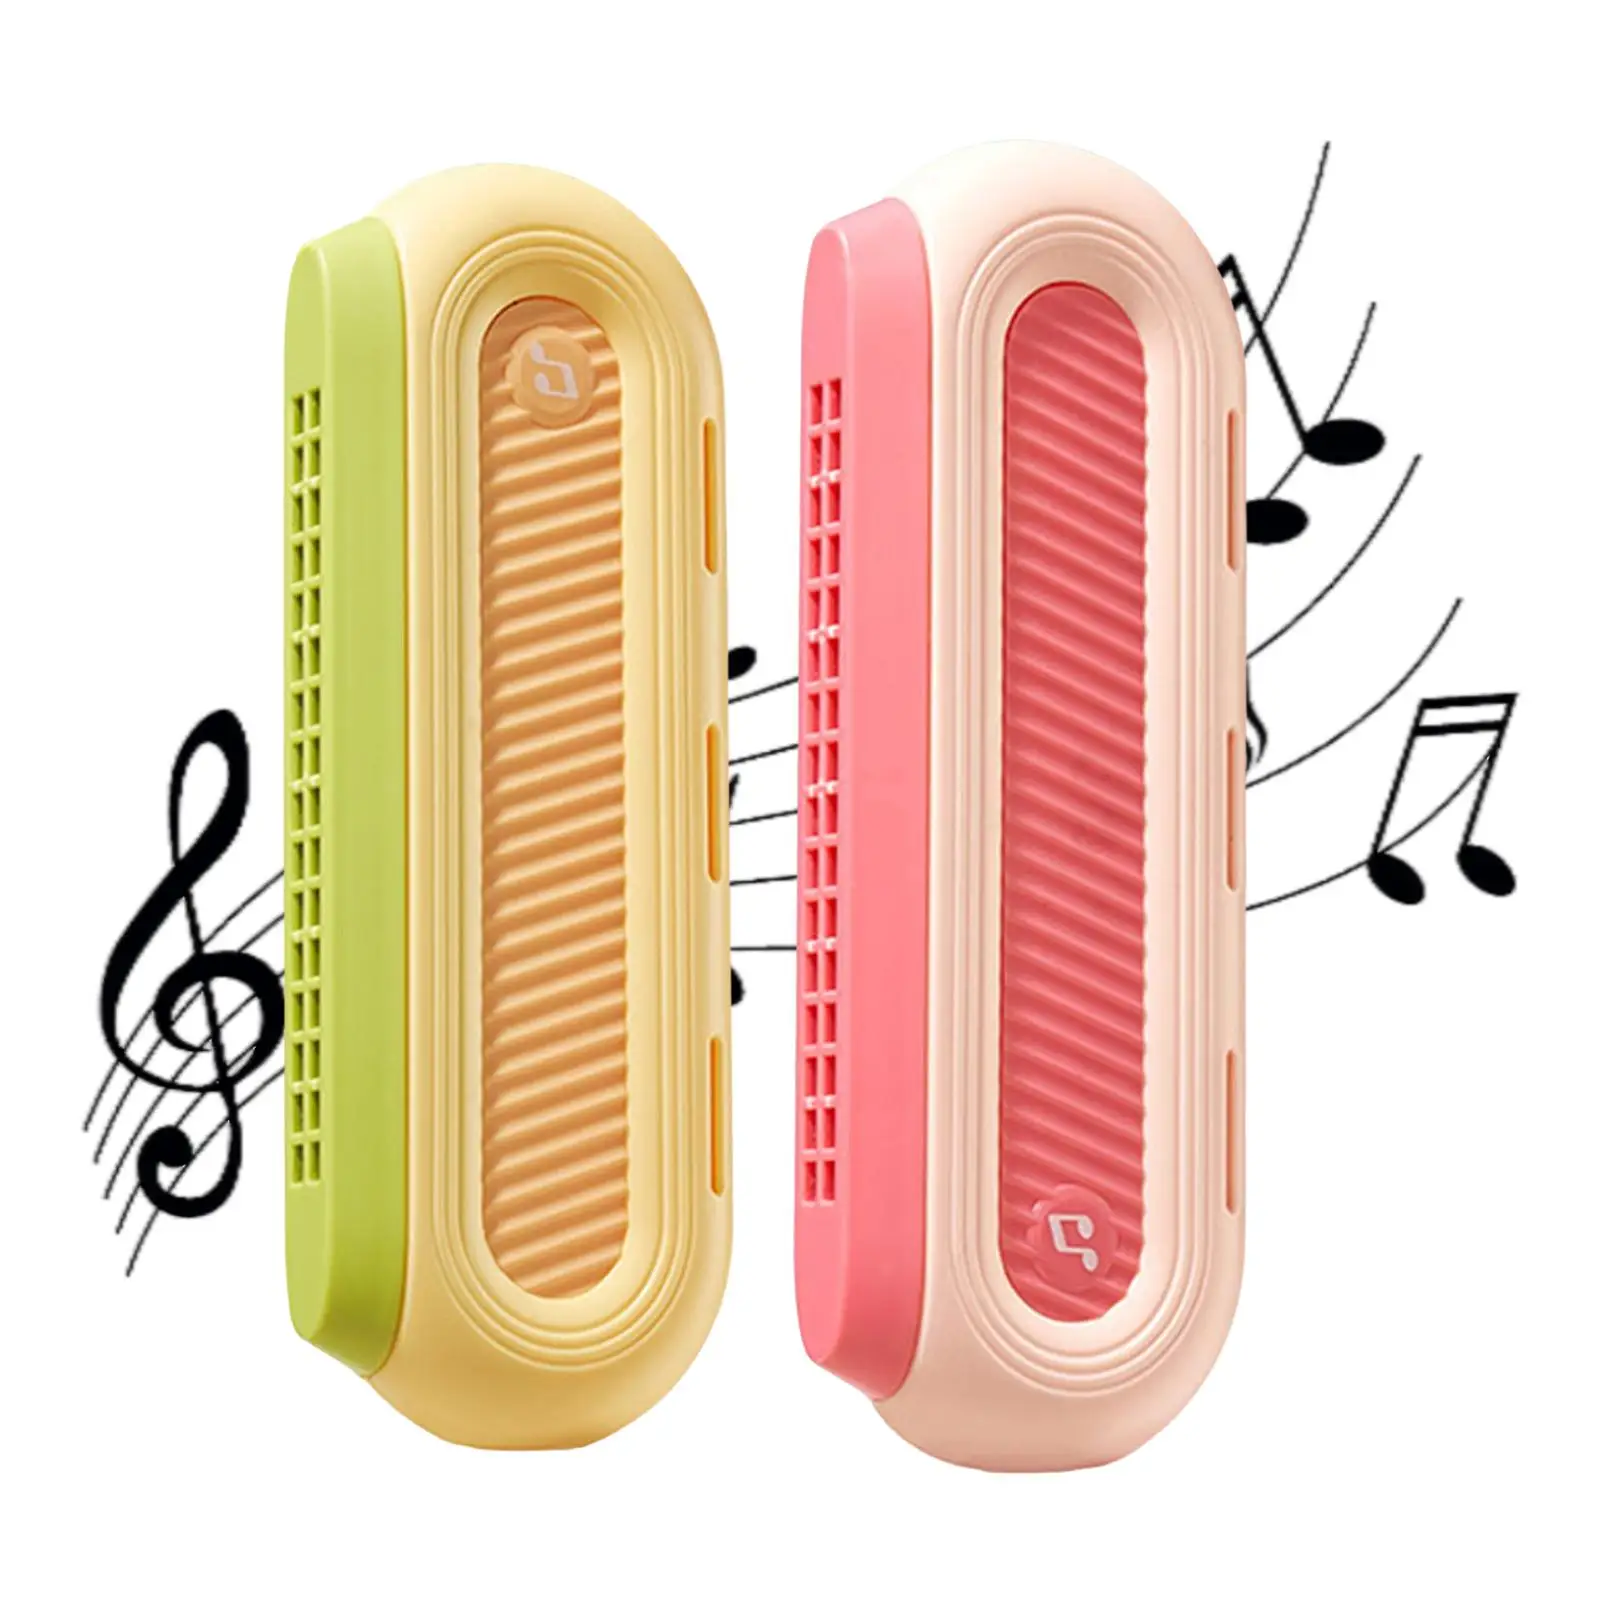 Portable Mouth Organ Toy Practical Teaching Aids 16 hole Key Educational Kids Harmonica for Game Family Gift Toddler Beginner